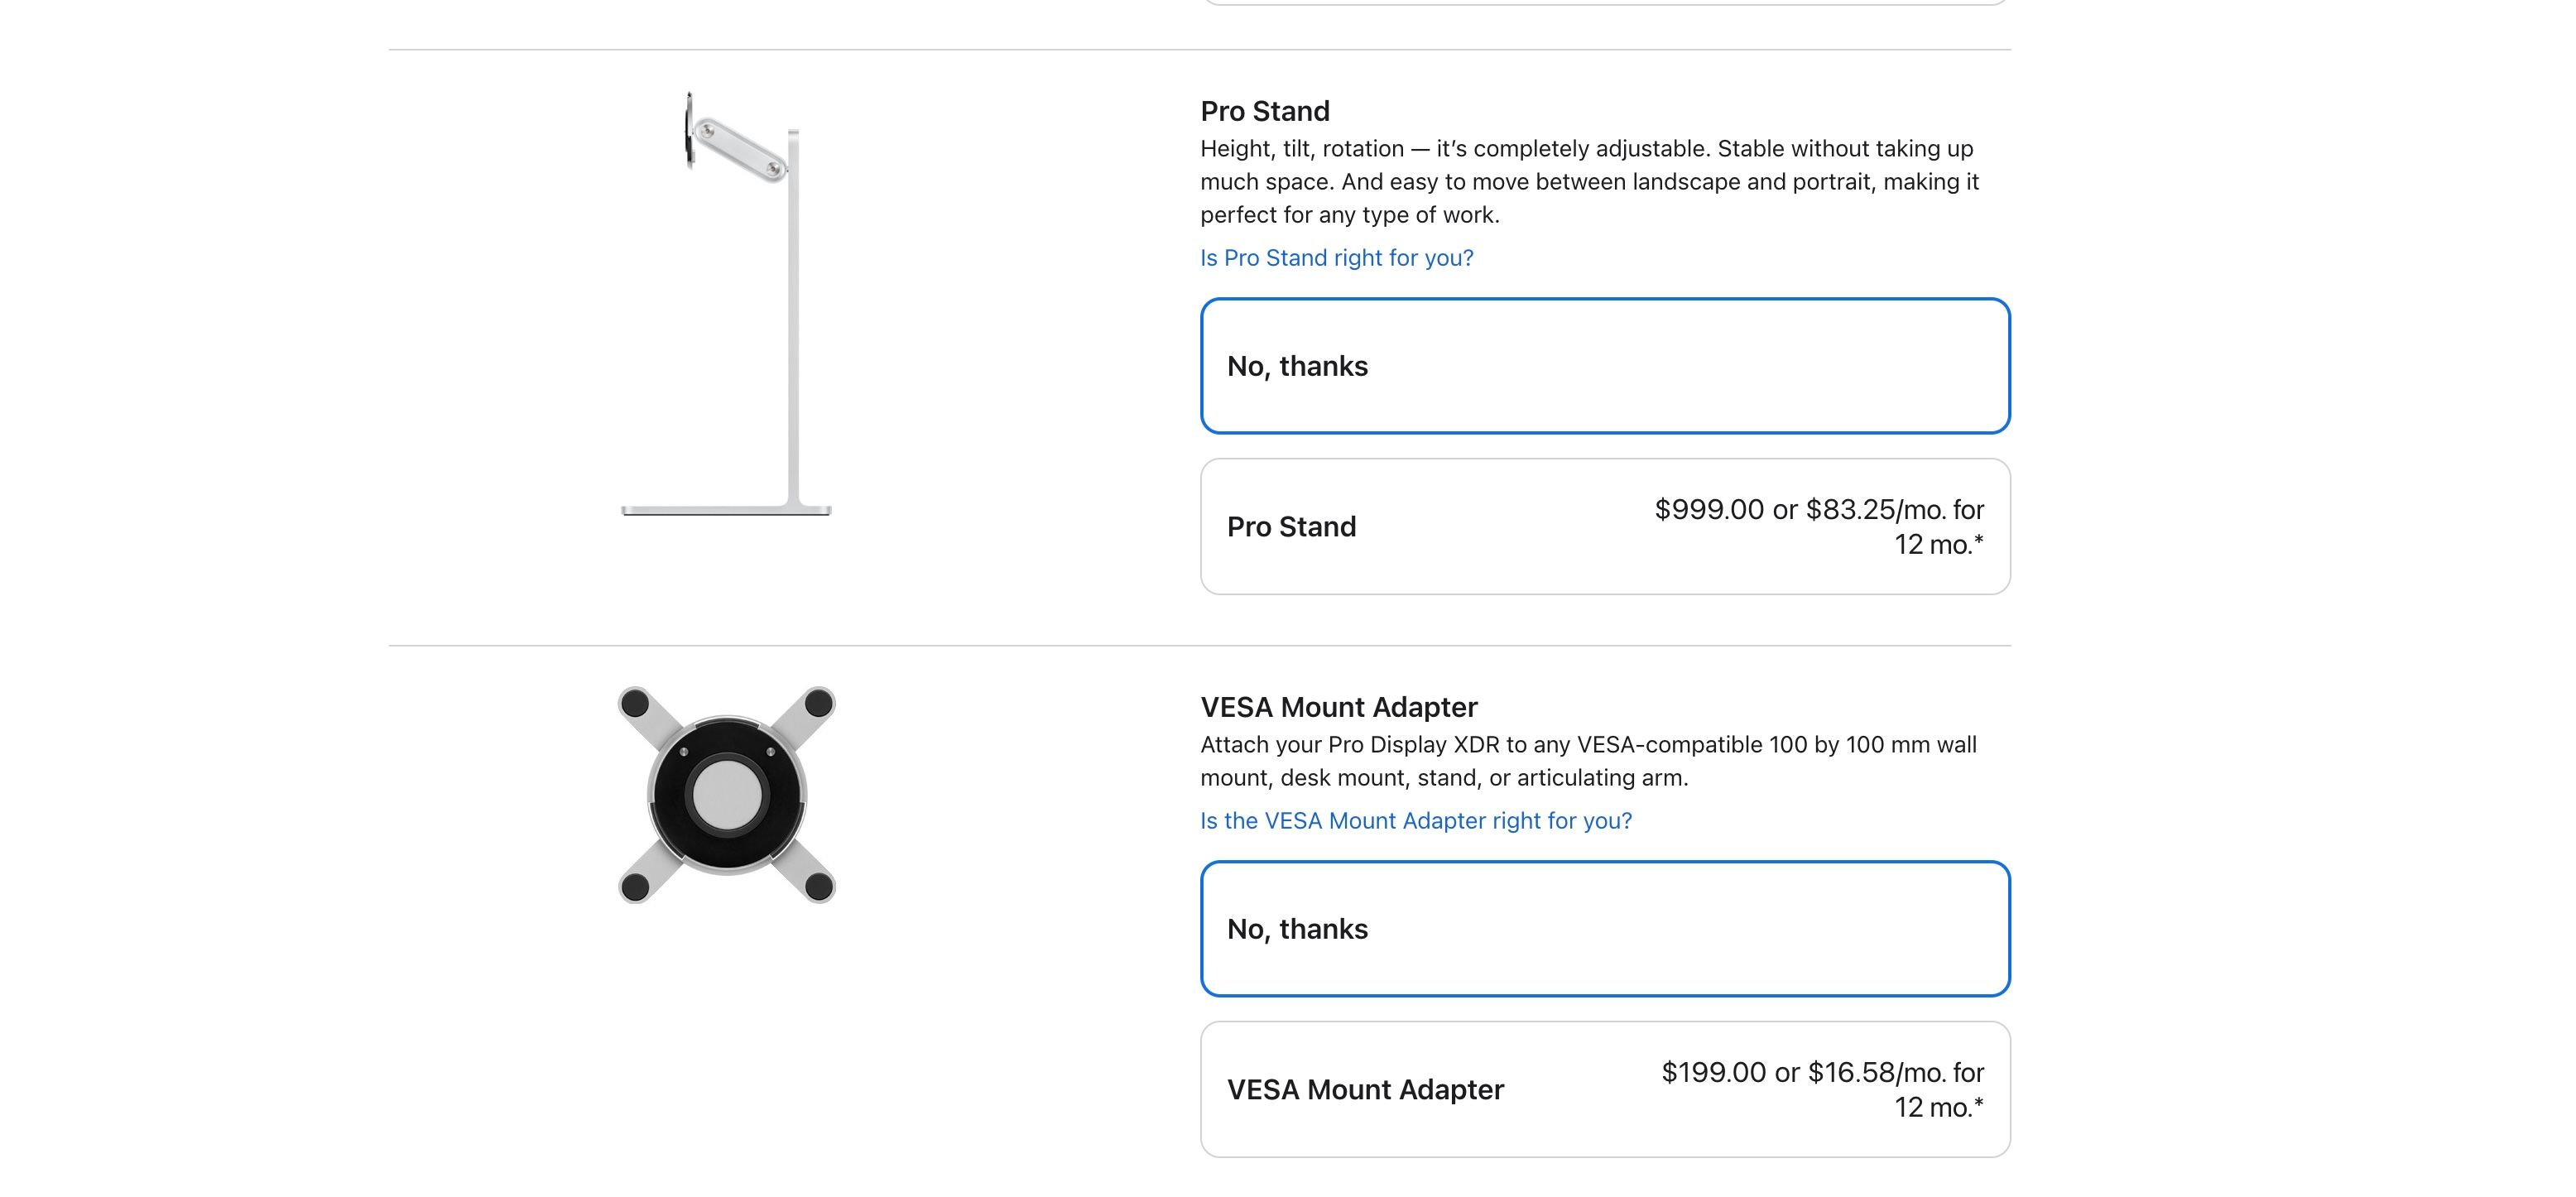 Pro Stand and VESA Adapter Prices on Apple's website